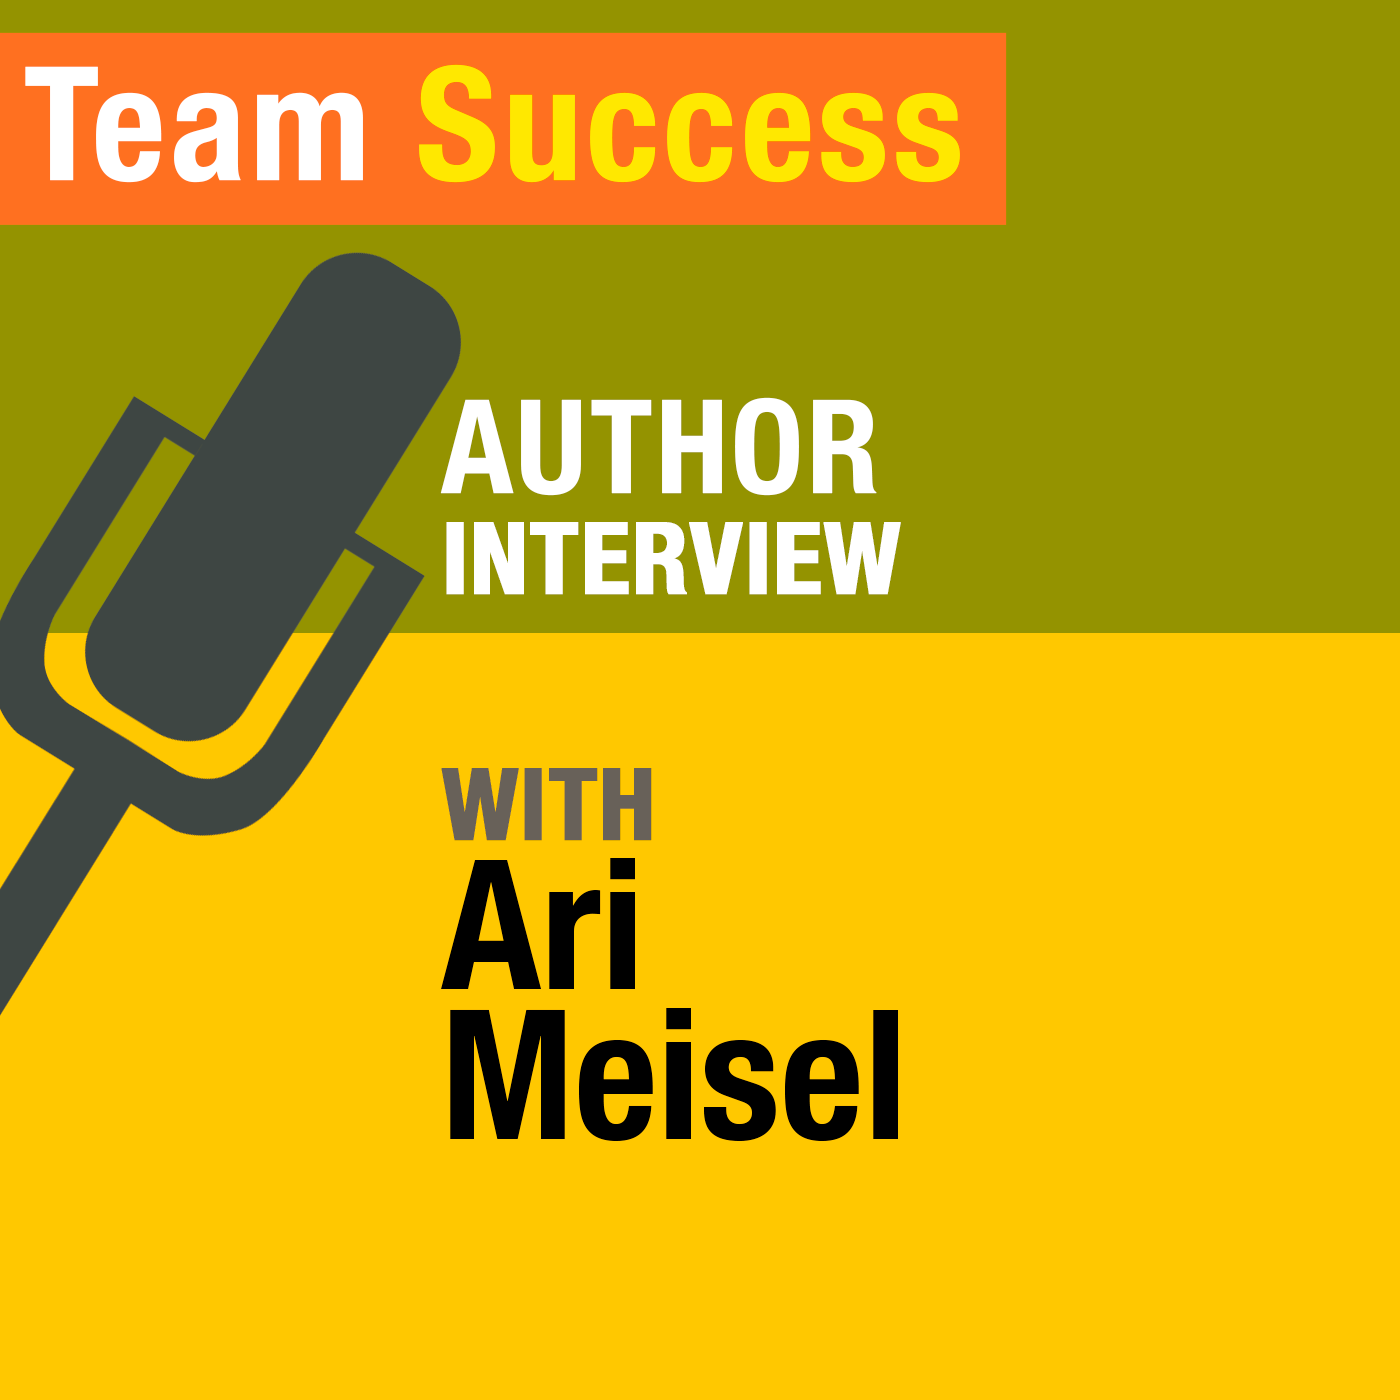 An Interview With Ari Meisel